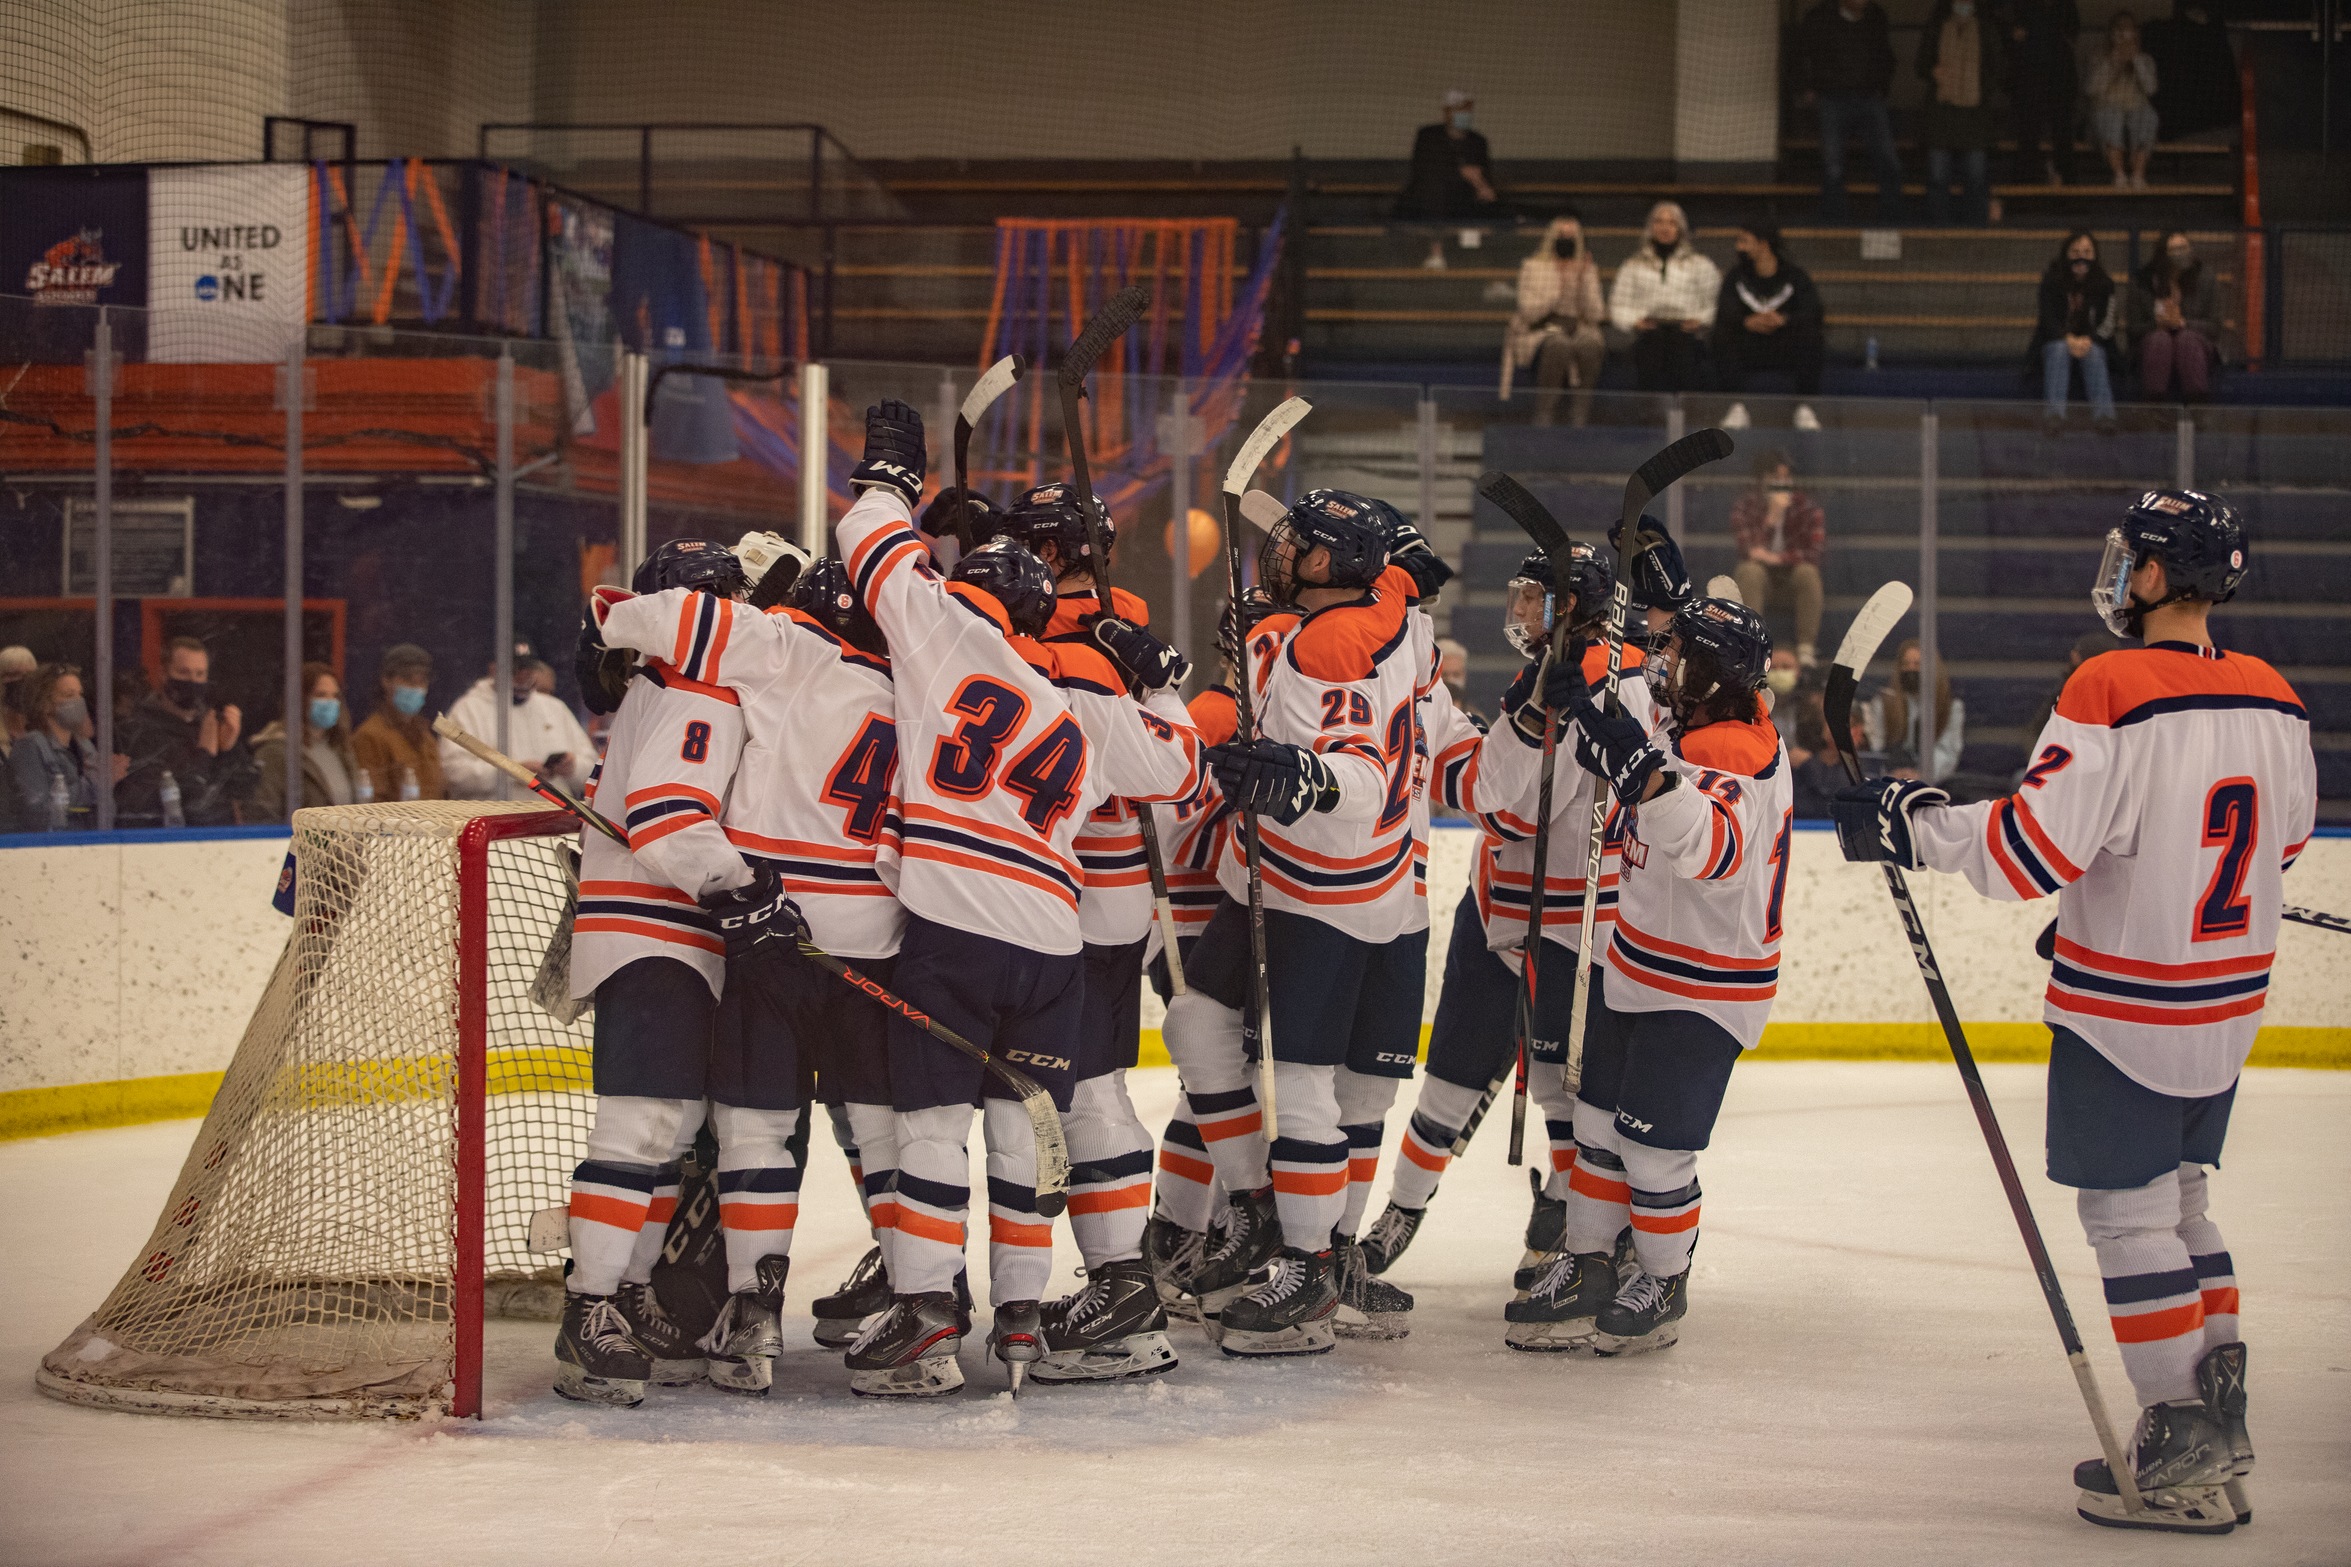 #6 Vikings To Play For MASCAC Championship, Defeat #5 Westfield State 4-2